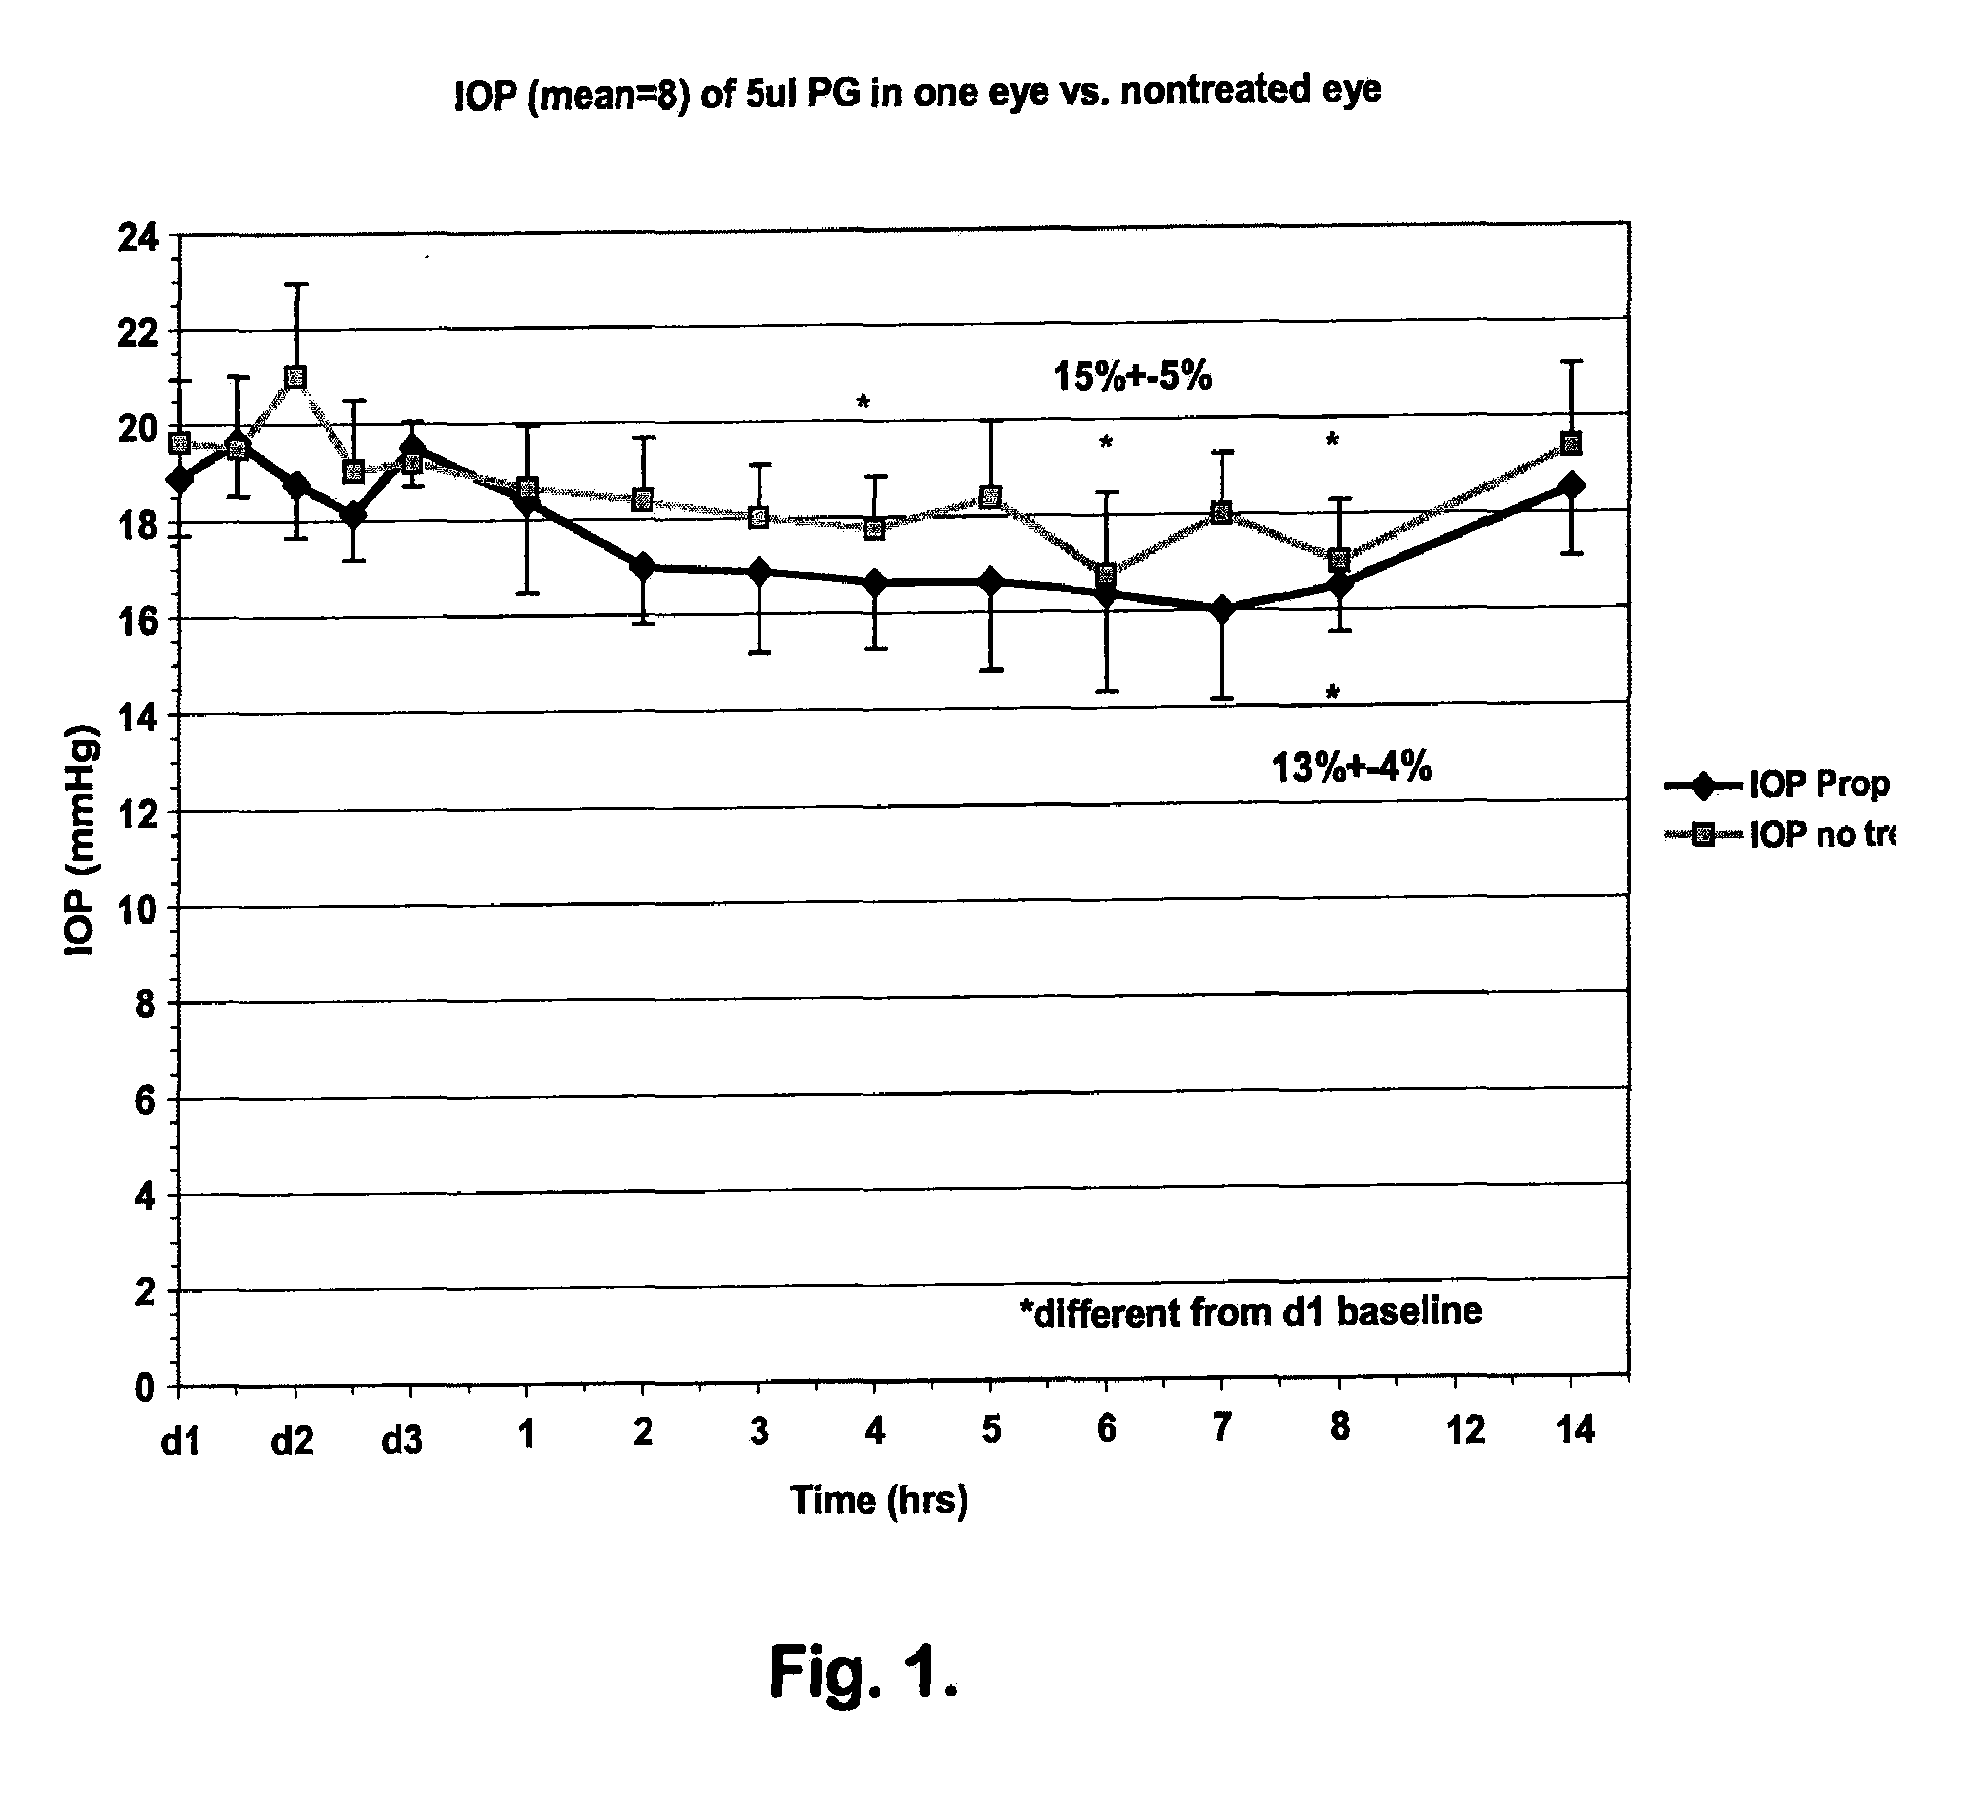 Vitamin D Compounds and Methods for Reducing Ocular Hypertension (OHT)